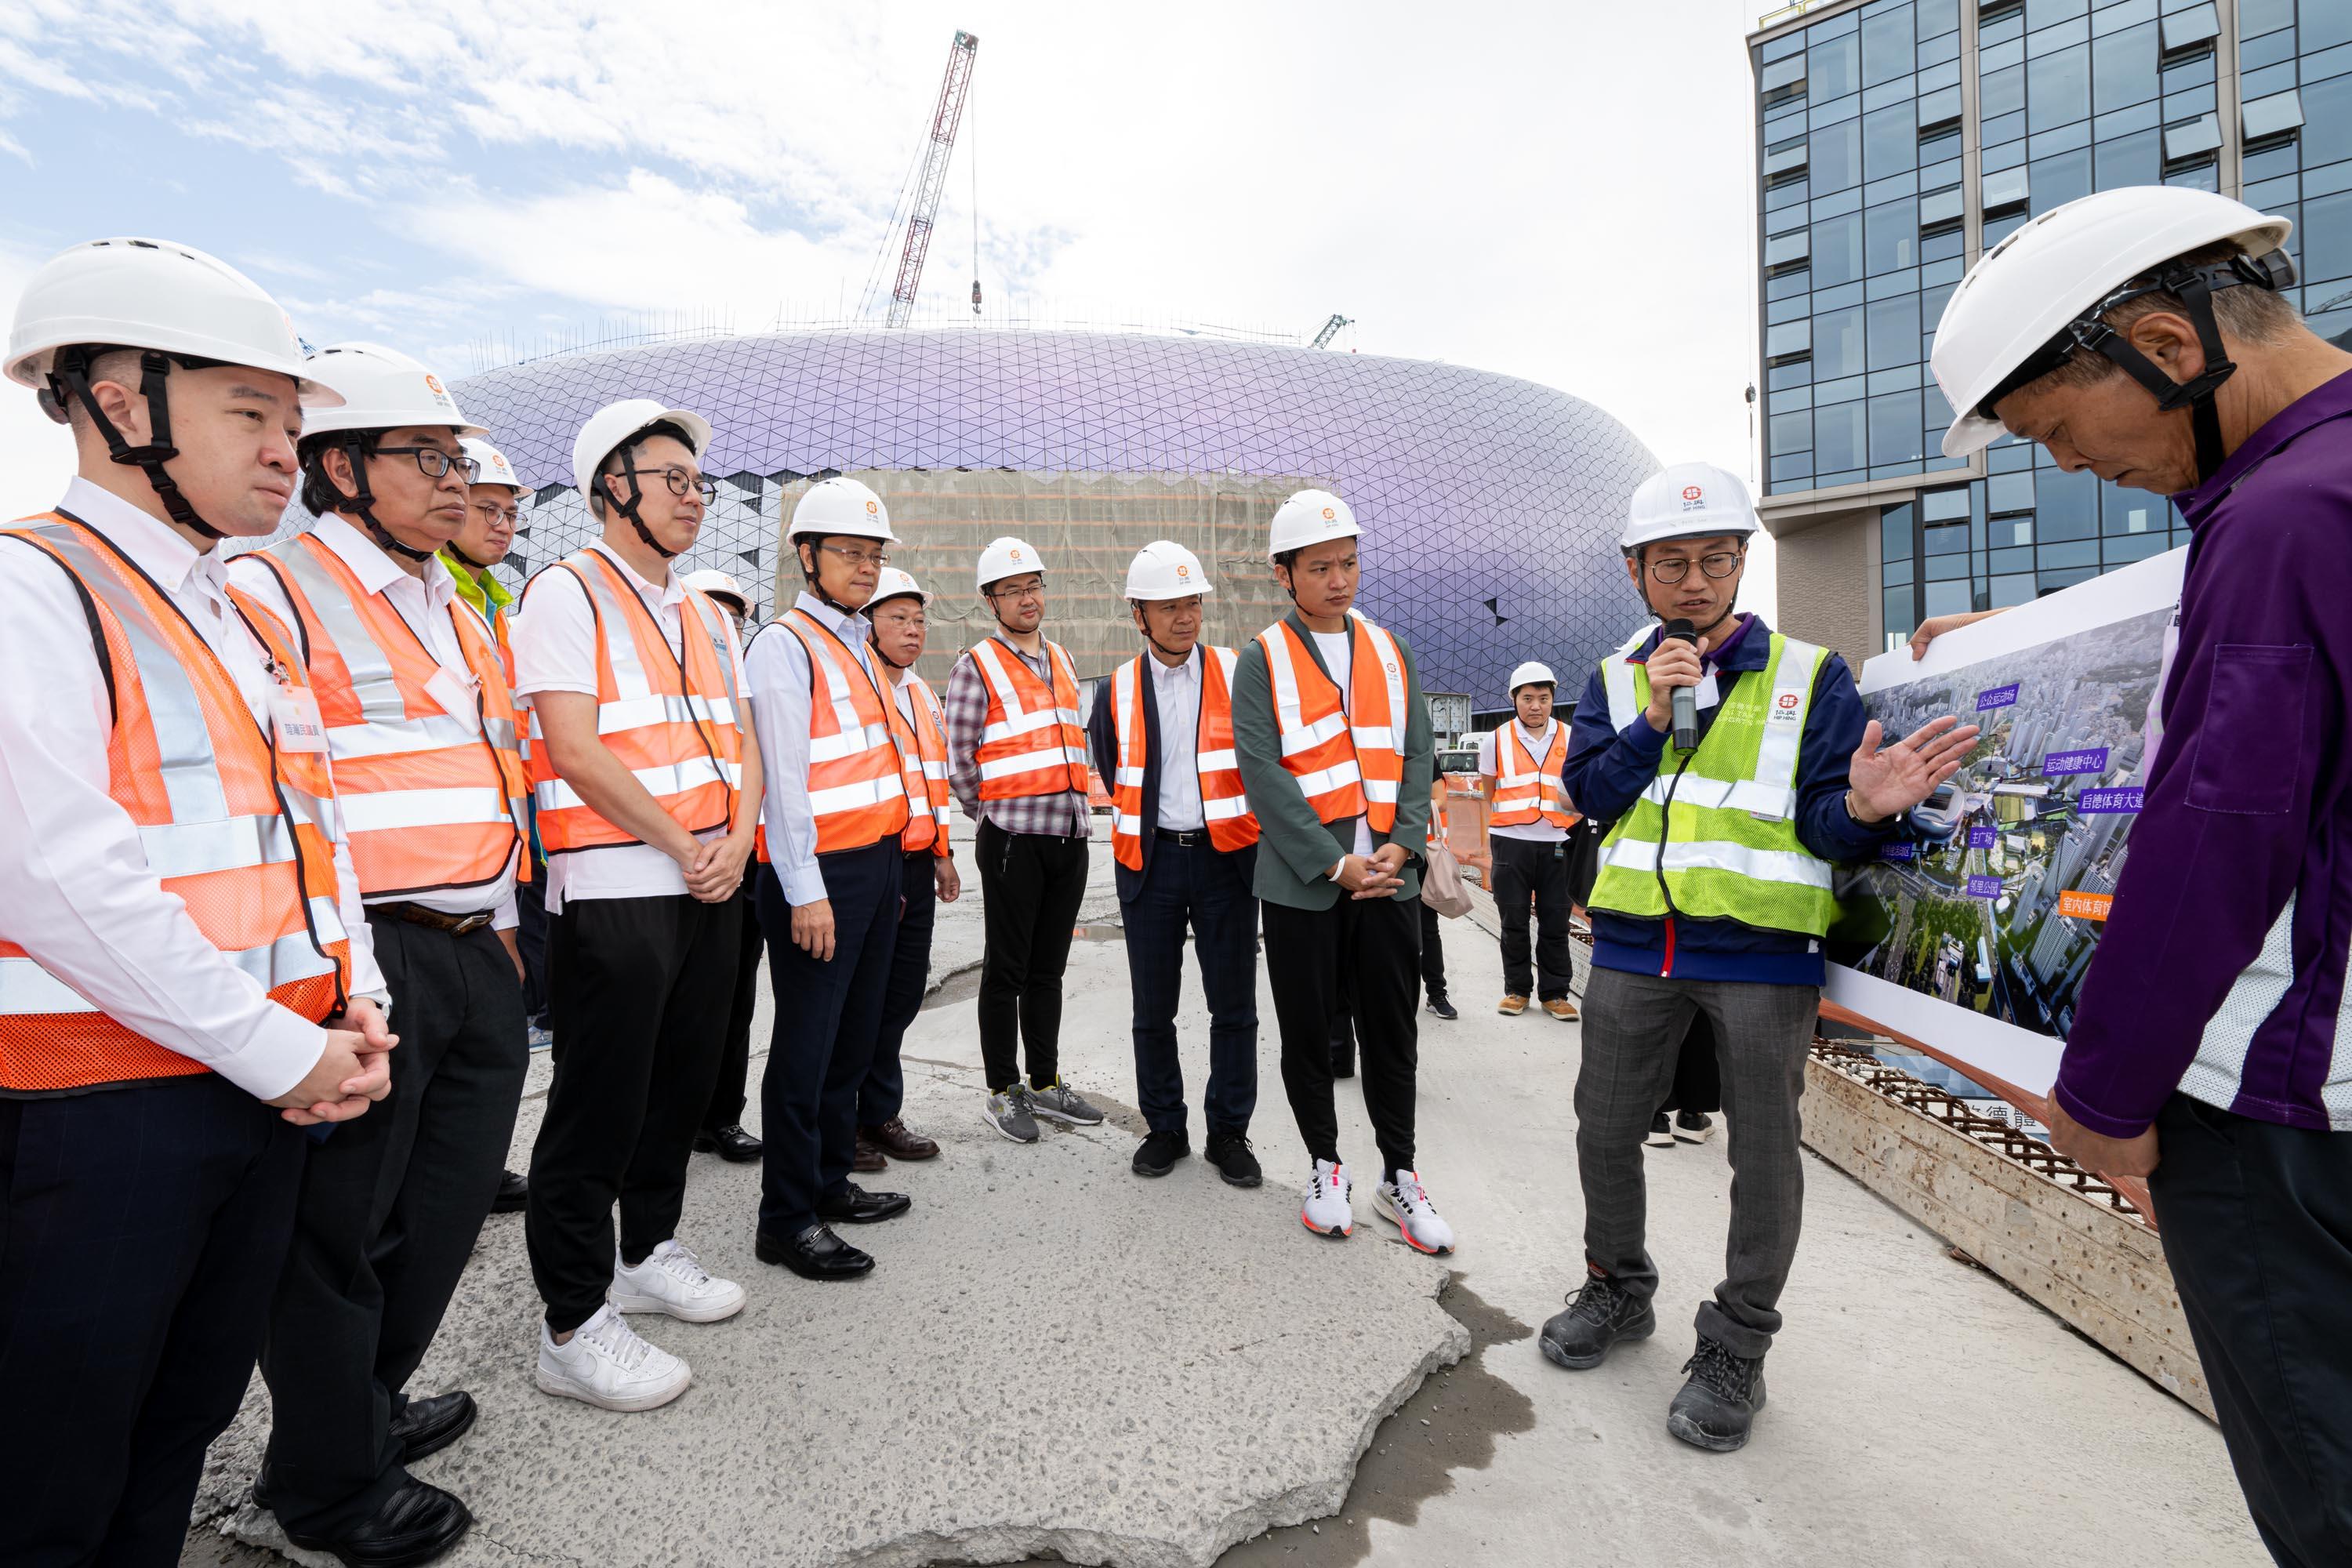 The Legislative Council (LegCo) Panel on Home Affairs, Culture and Sports and Public Works Subcommittee conducted a joint visit to the Kai Tak Sports Park (KTSP) today (October 17). Photo shows LegCo Members receiving a briefing by the representatives of KTSP Limited on the construction progress of the KTSP project.
